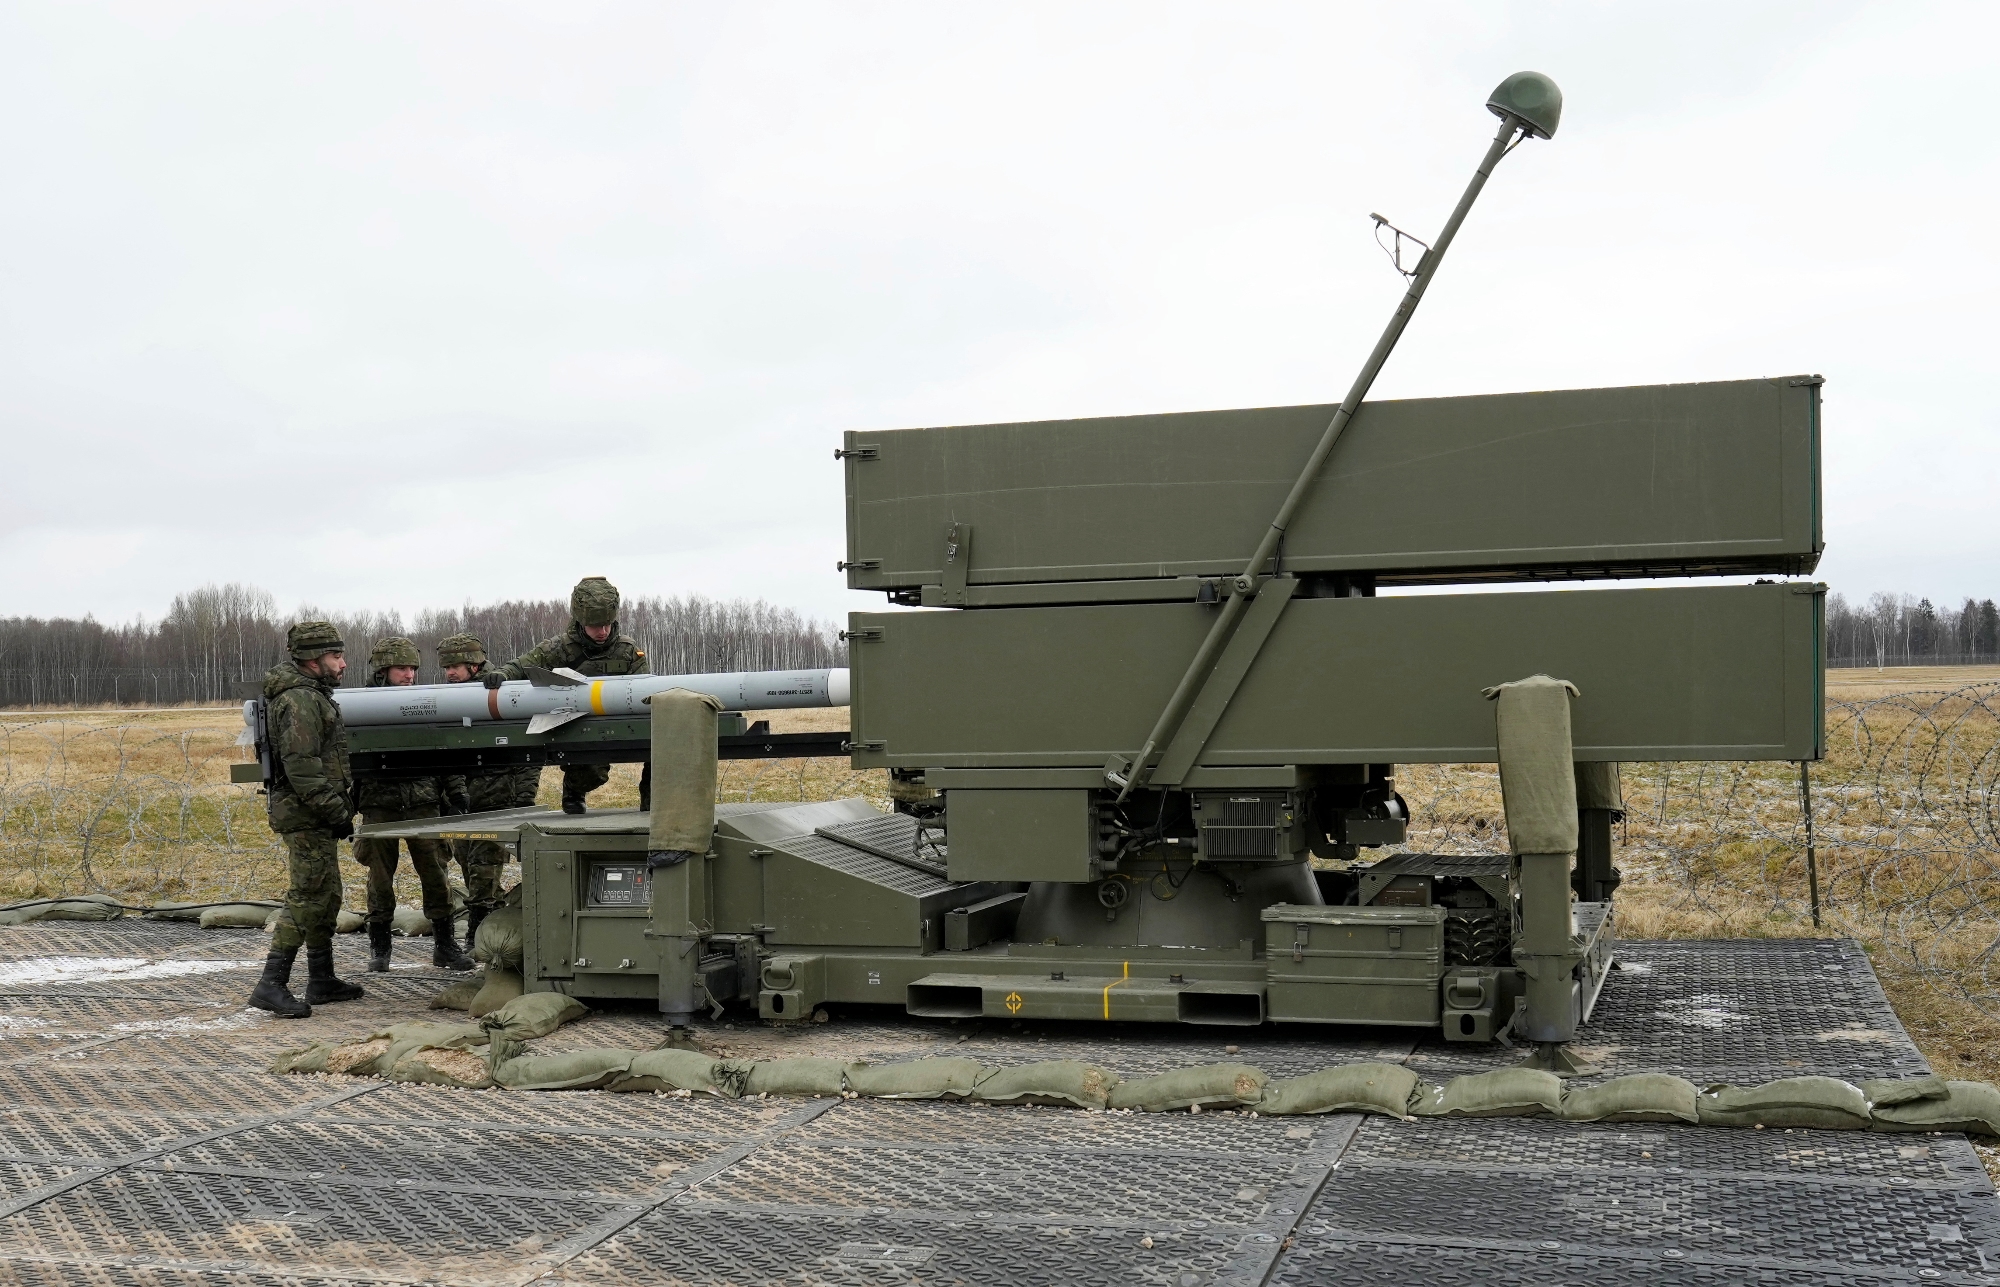 NASAMS munitions, AIM-9M missiles, Javelin APCs and artillery shells: US announces new $150m military aid package for Ukraine